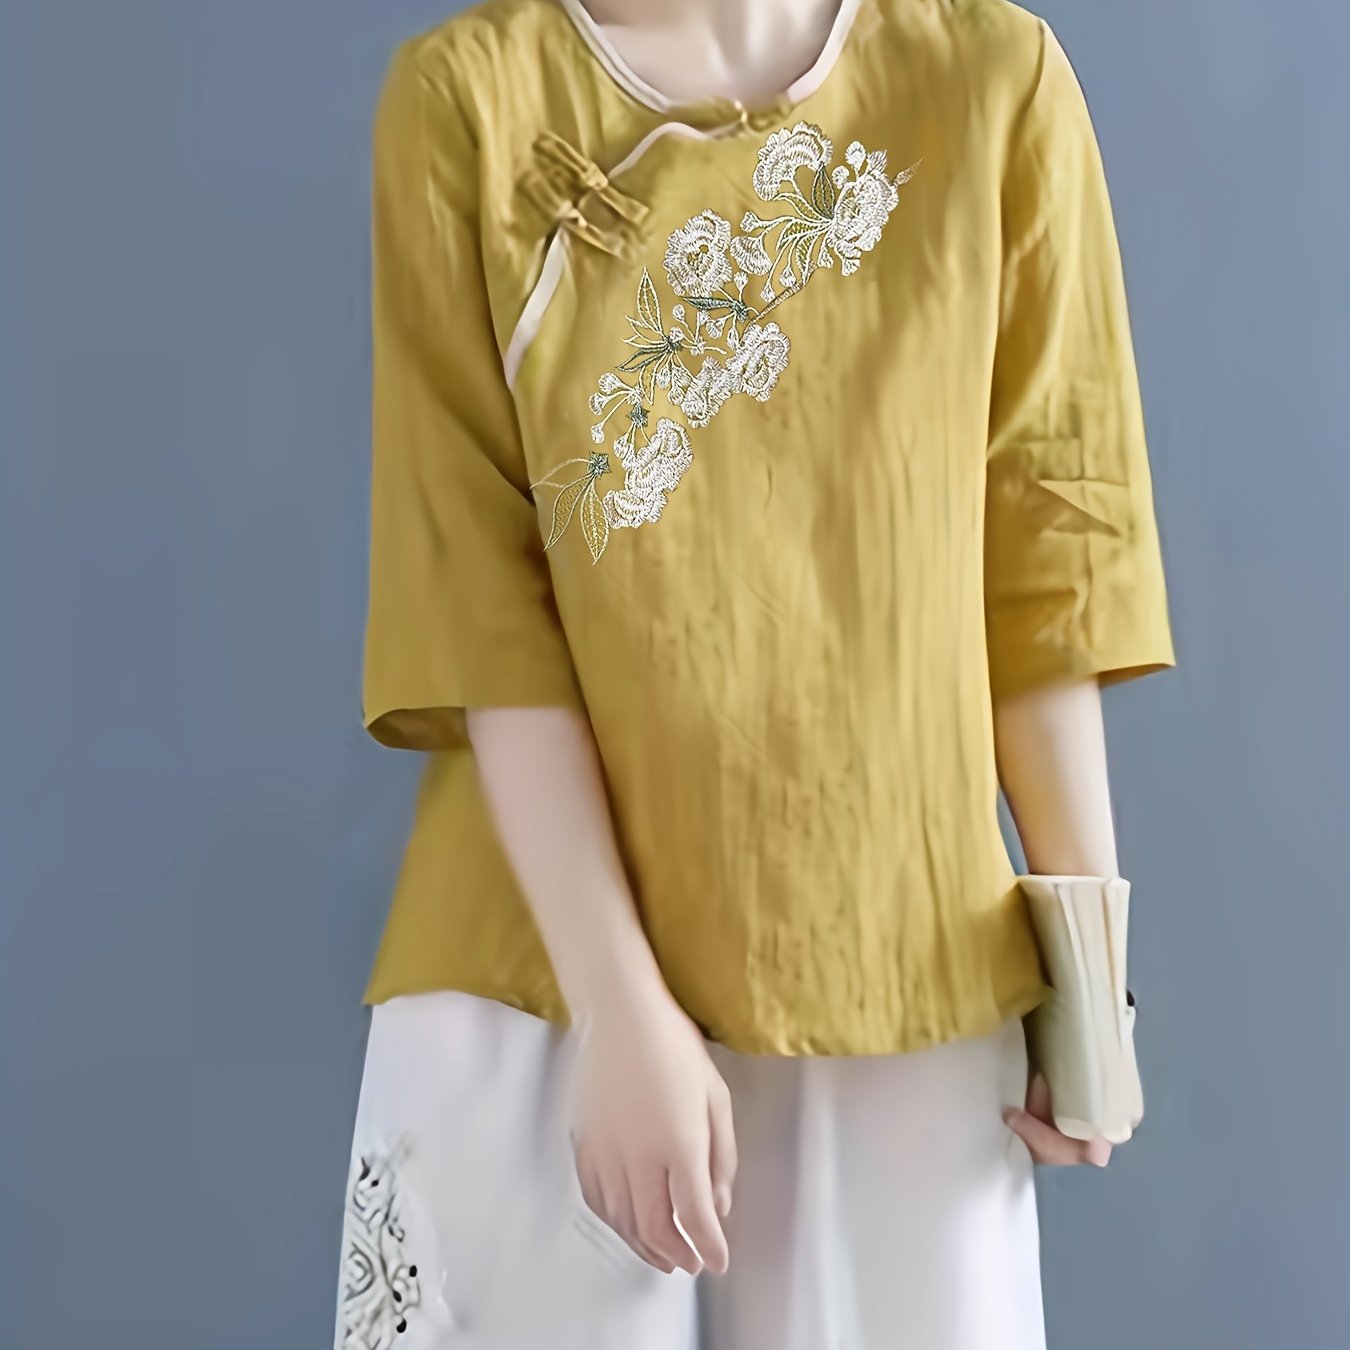 embroidered tang suit t shirt chinese traditional top loose casual top for spring summer womens clothing